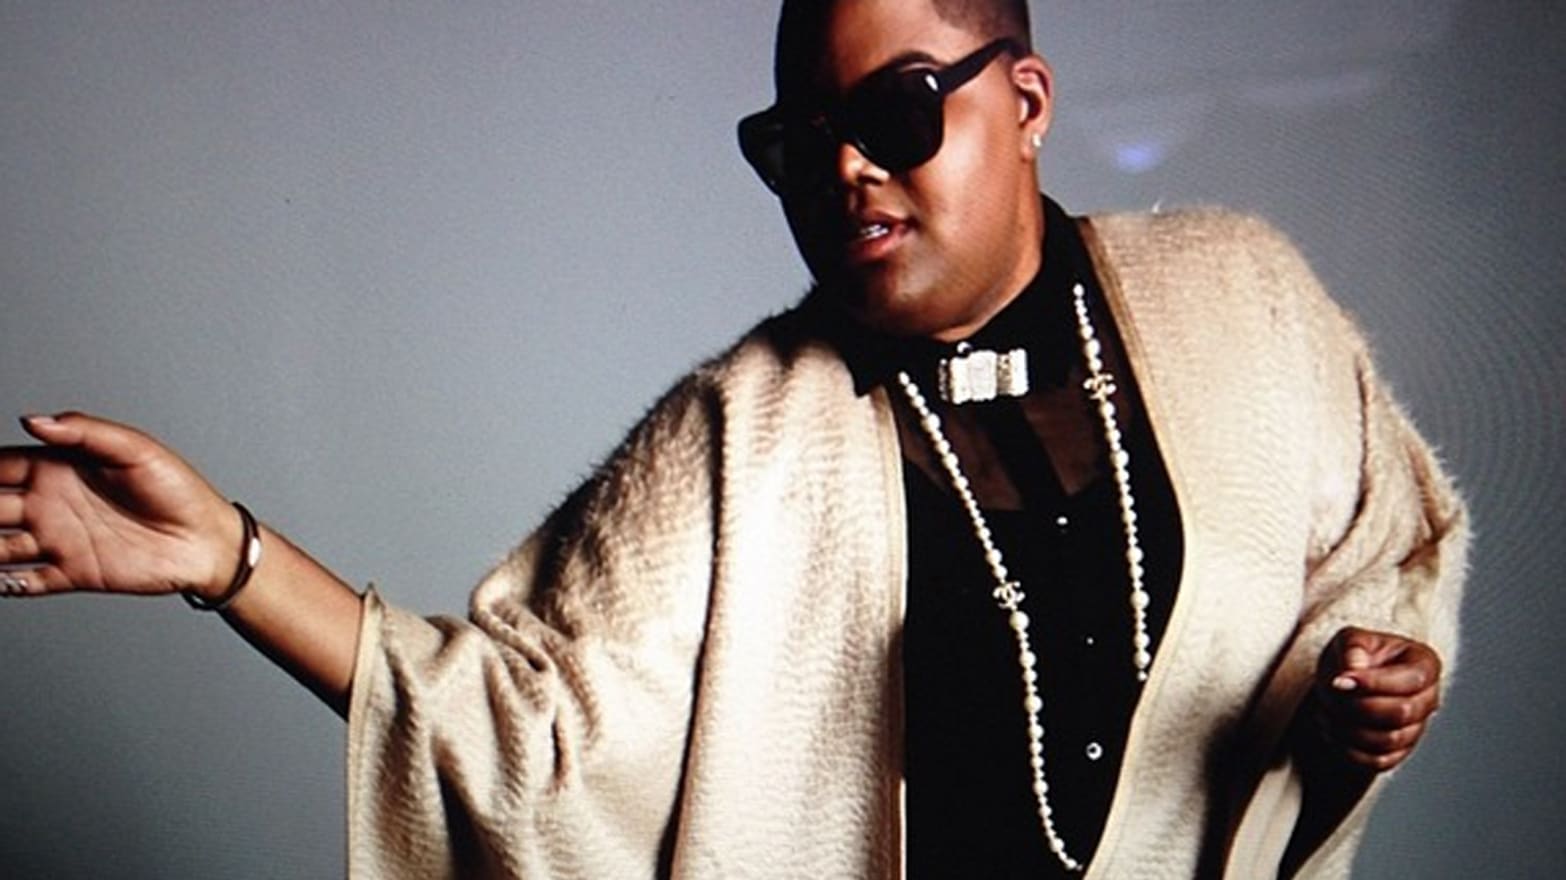 EJ Johnson Is 'Not Just Some Other Rich Girl' - The New York Times